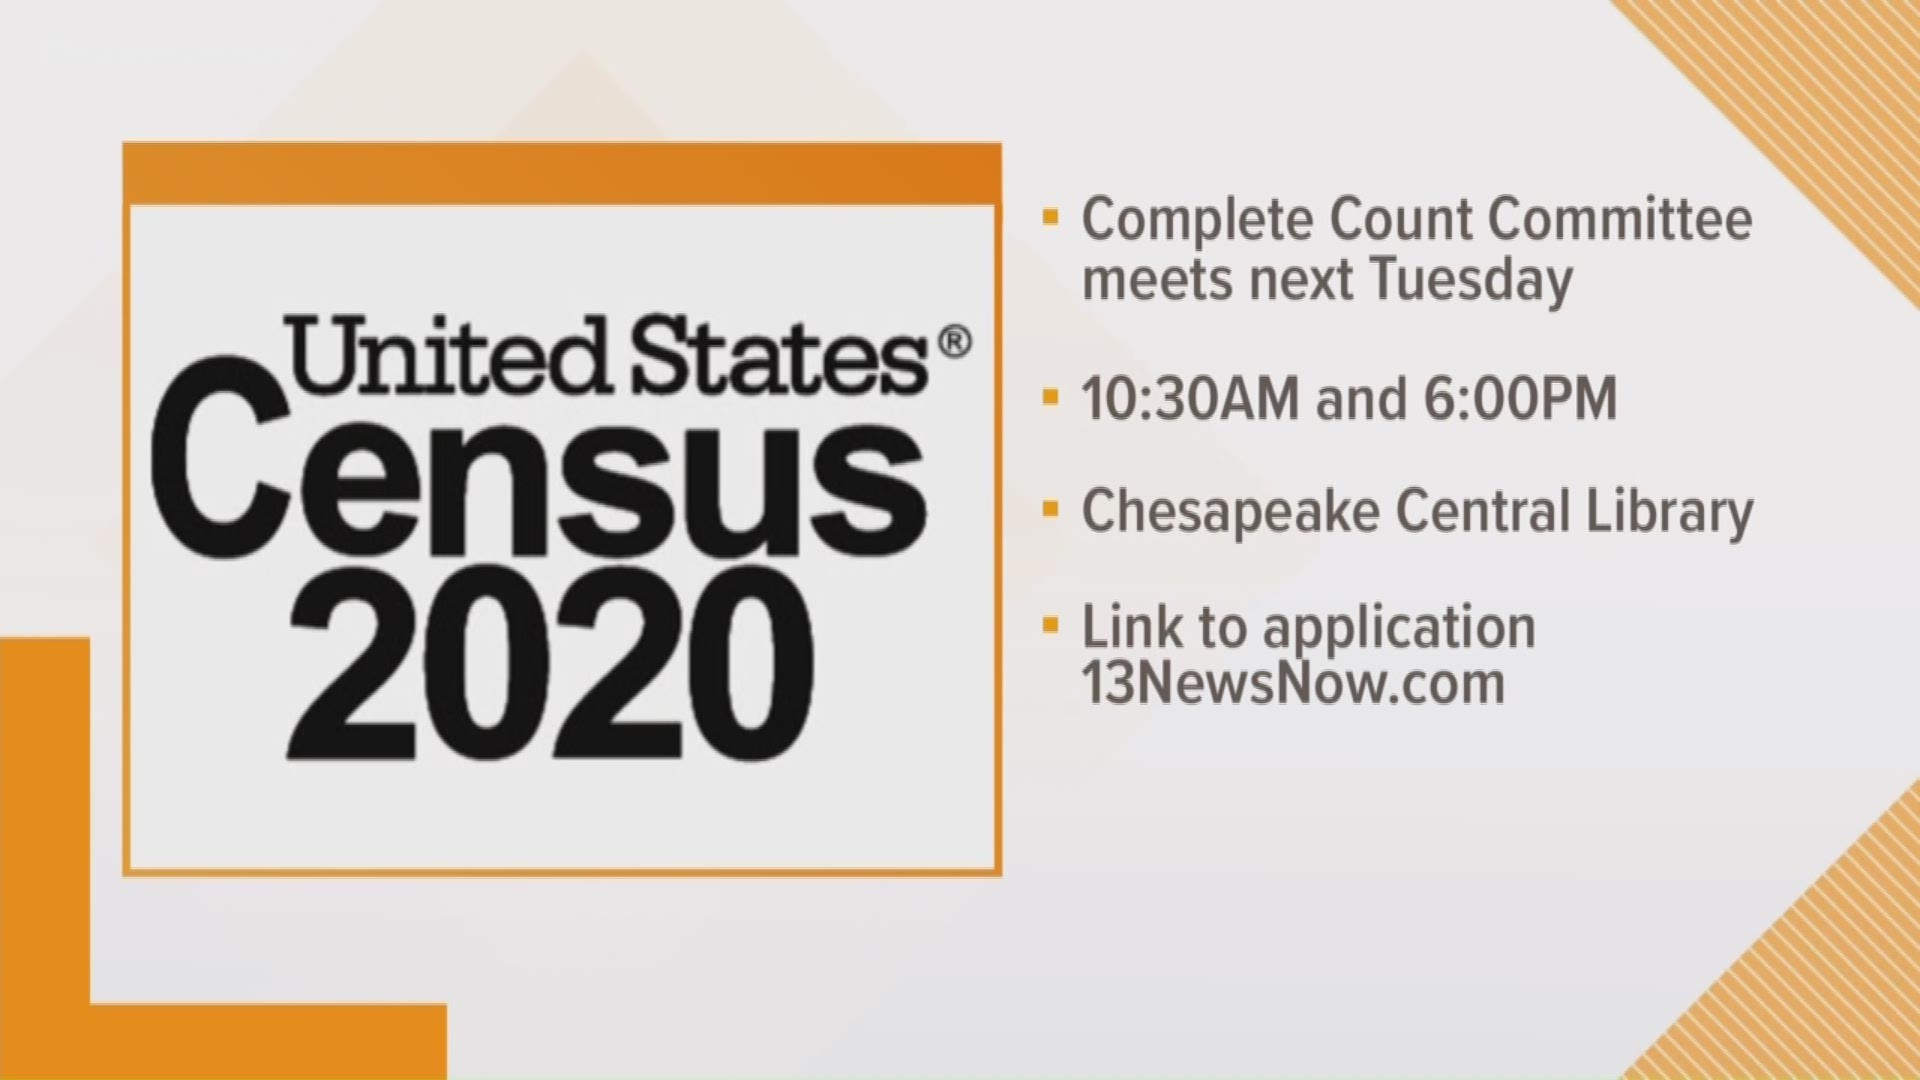 The City of Chesapeake is hiring field representatives for the 2020 Census.